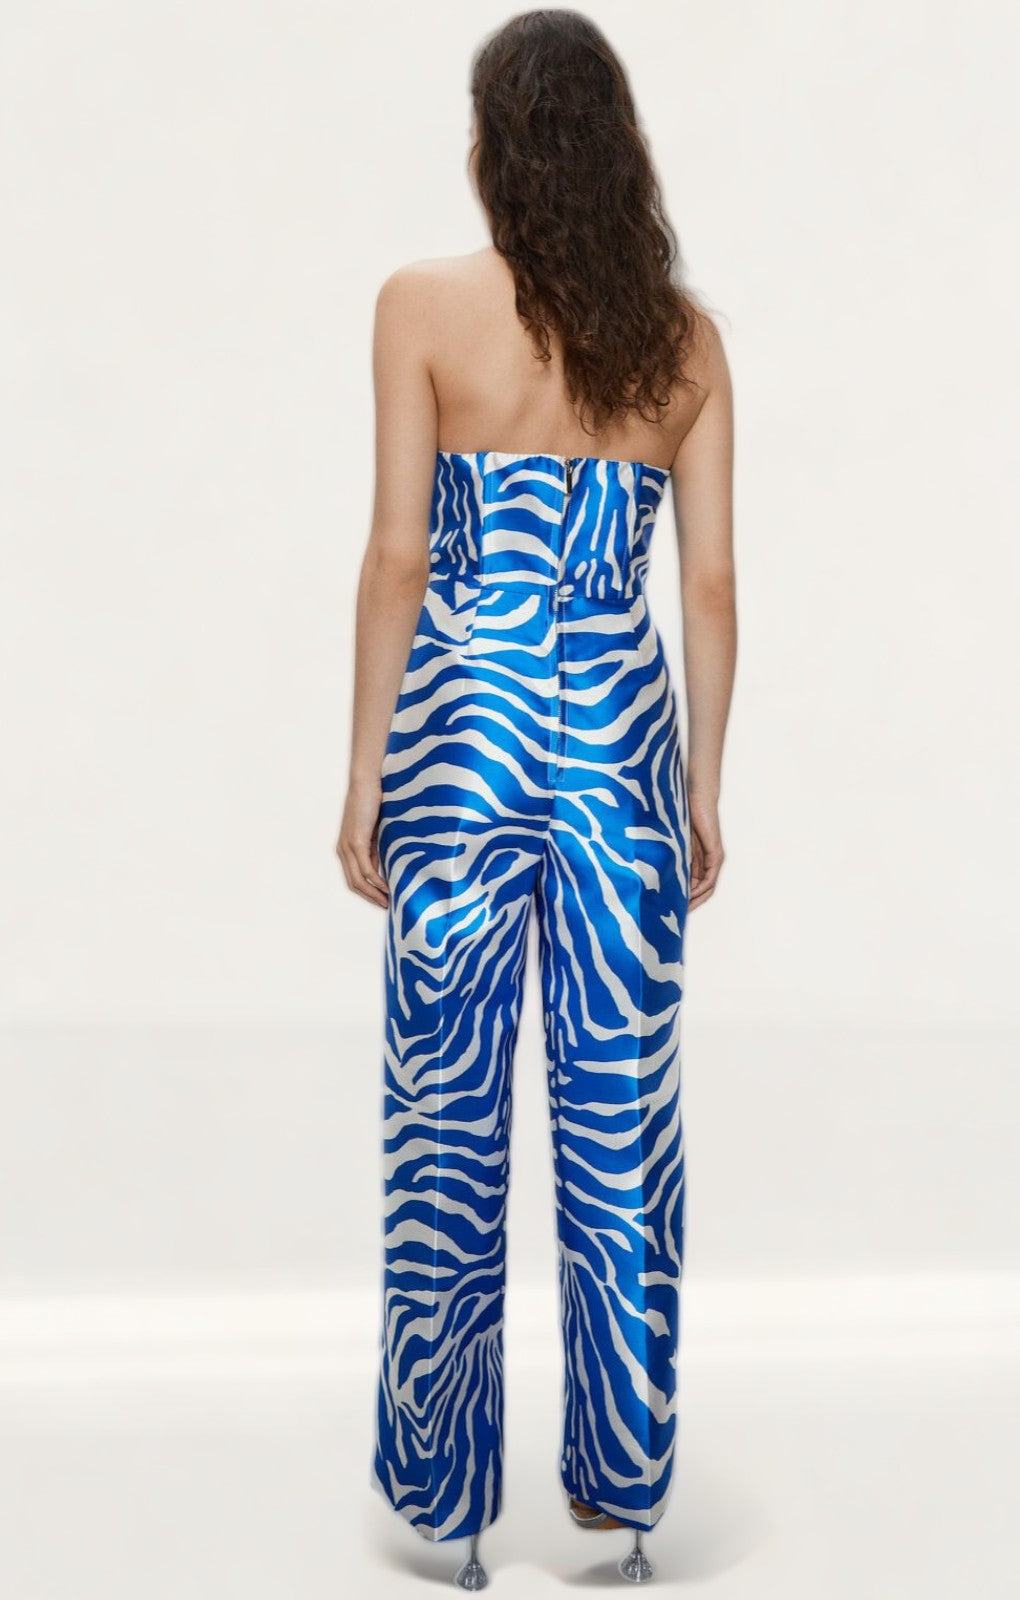 Warehouse Blue Premium Tailored Printed Jumpsuit product image